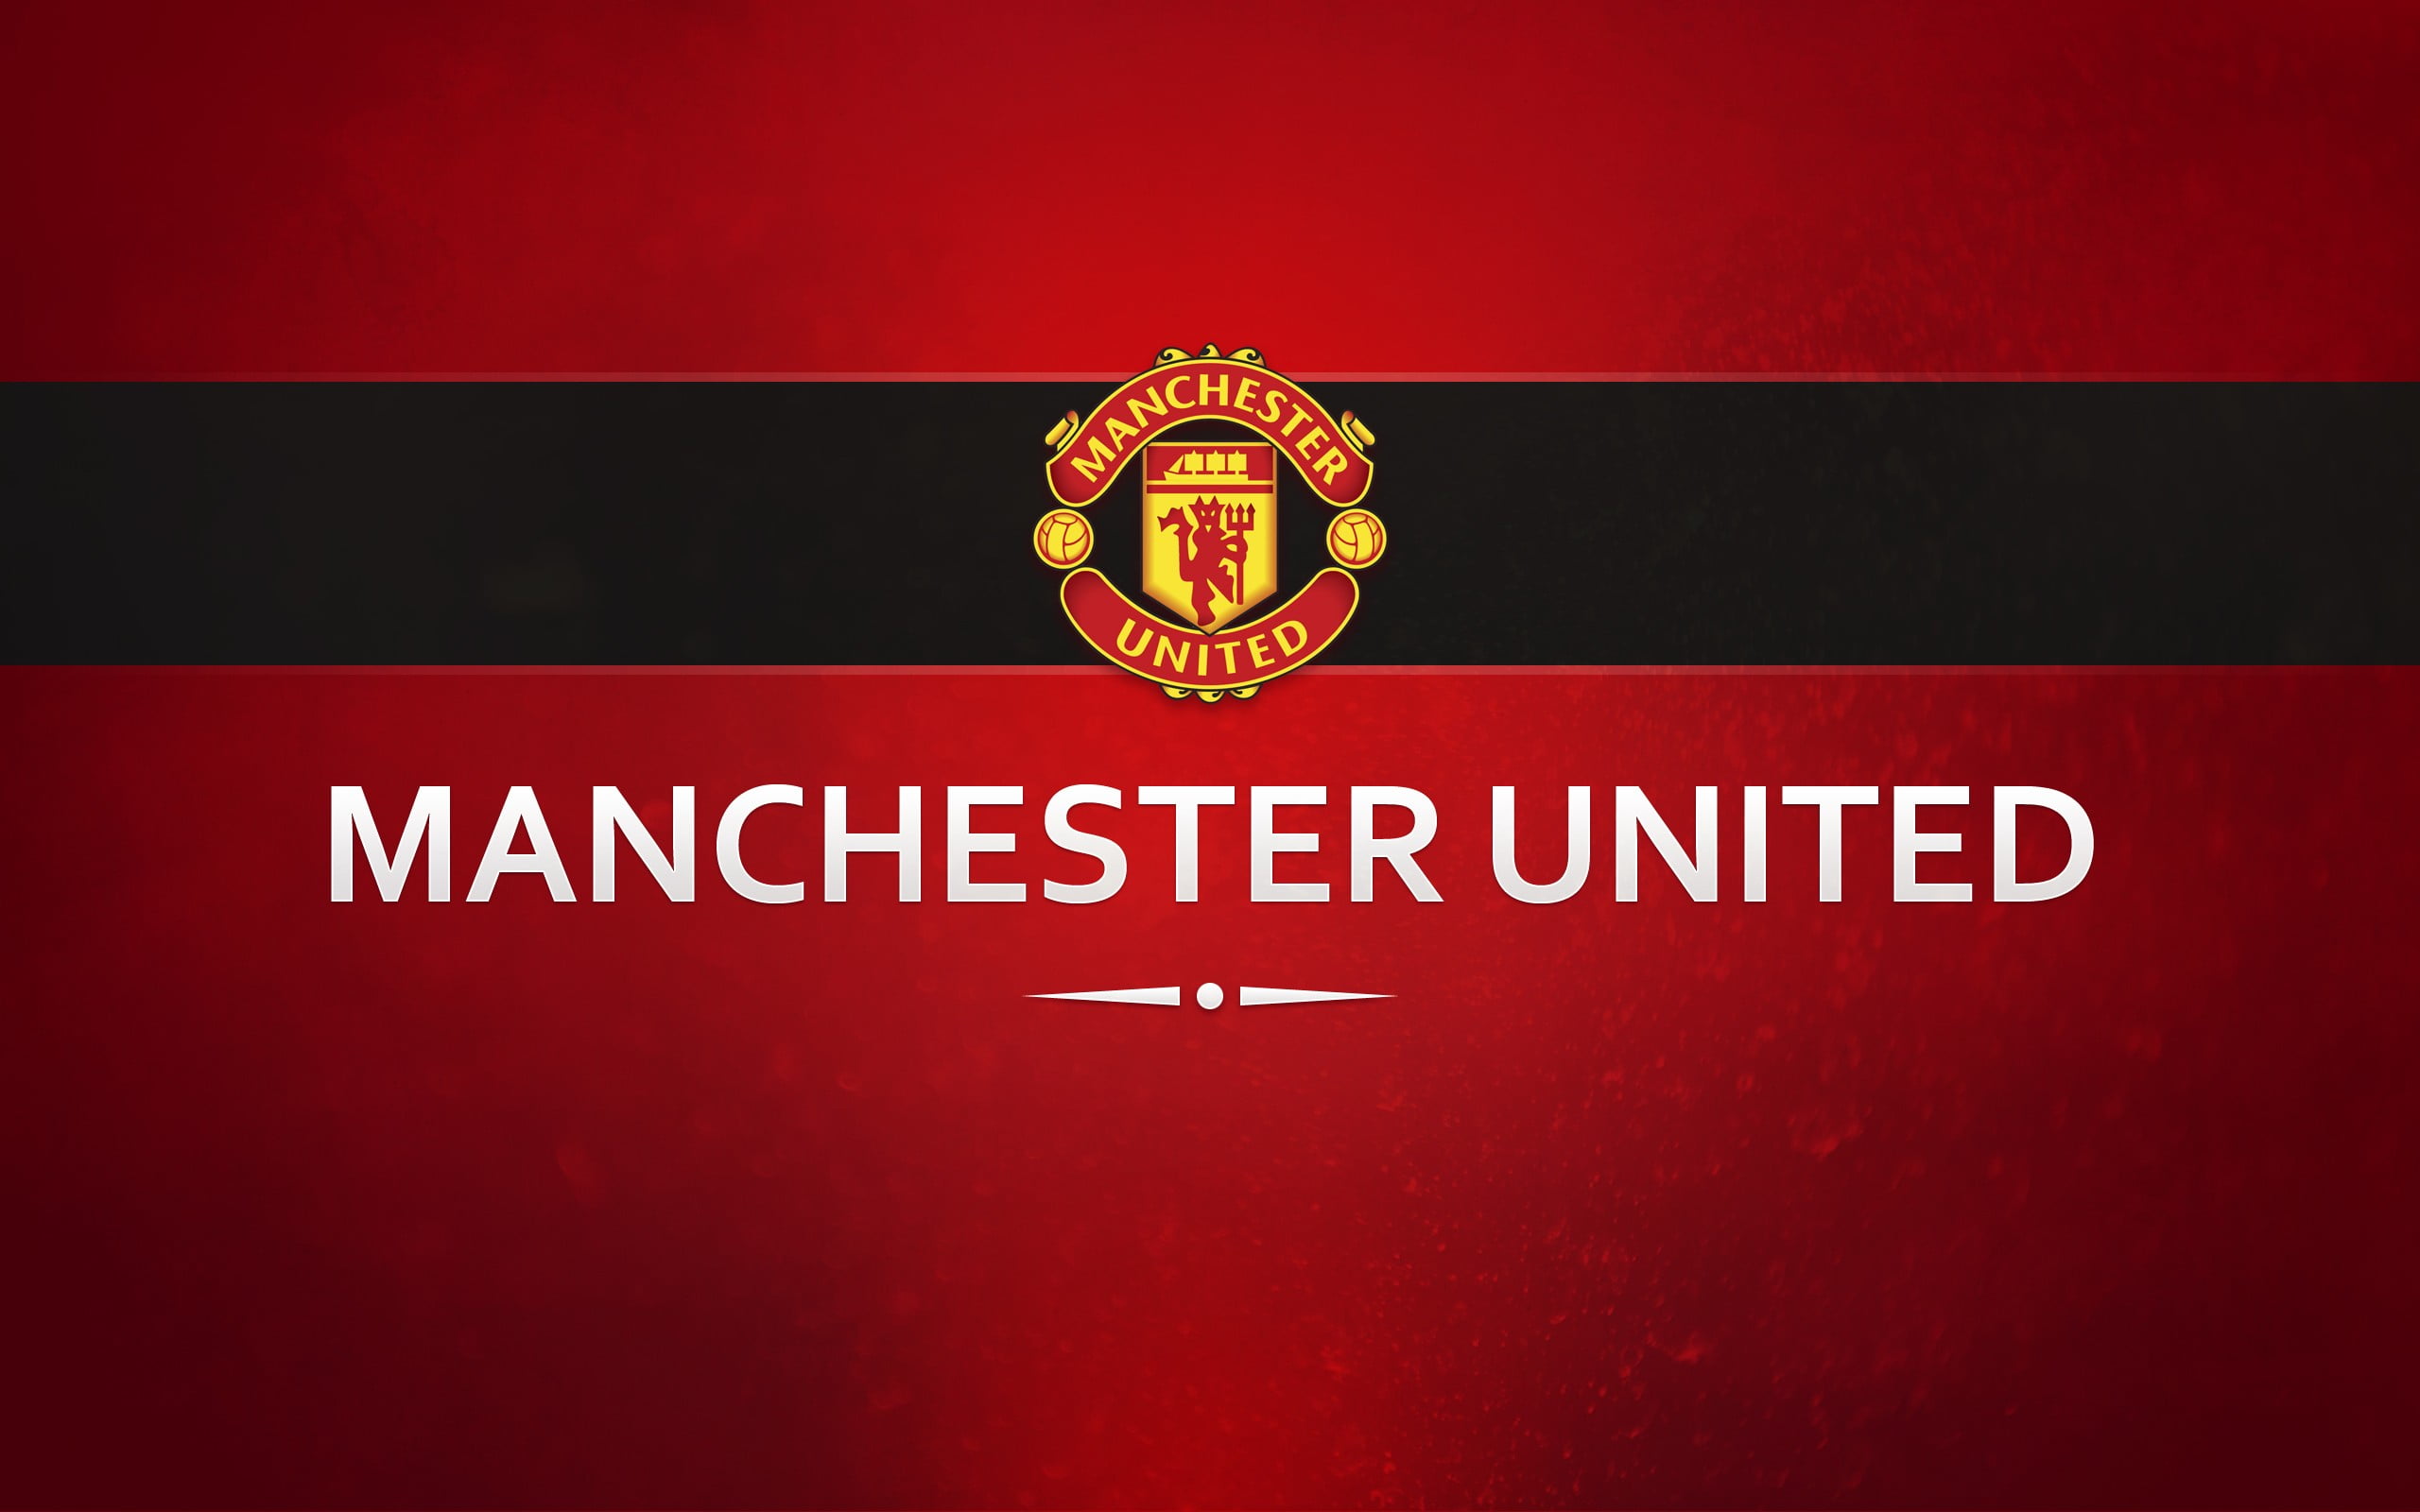 Manchester United logo, soccer clubs, Premier League, typography